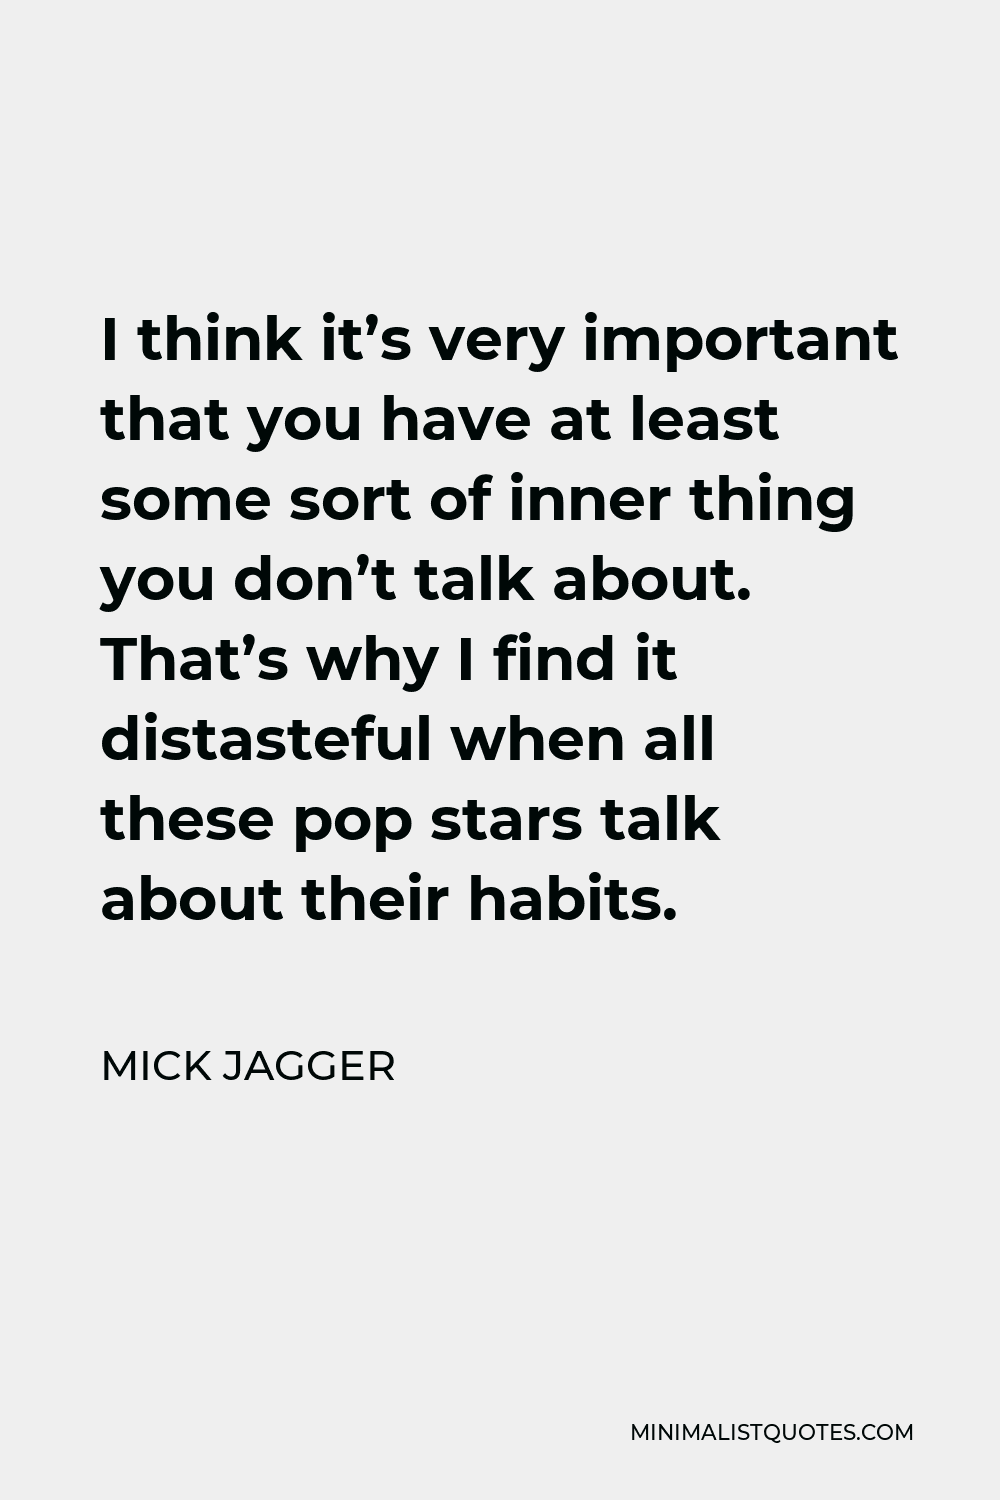 Mick Jagger Quote - I think it’s very important that you have at least some sort of inner thing you don’t talk about. That’s why I find it distasteful when all these pop stars talk about their habits.